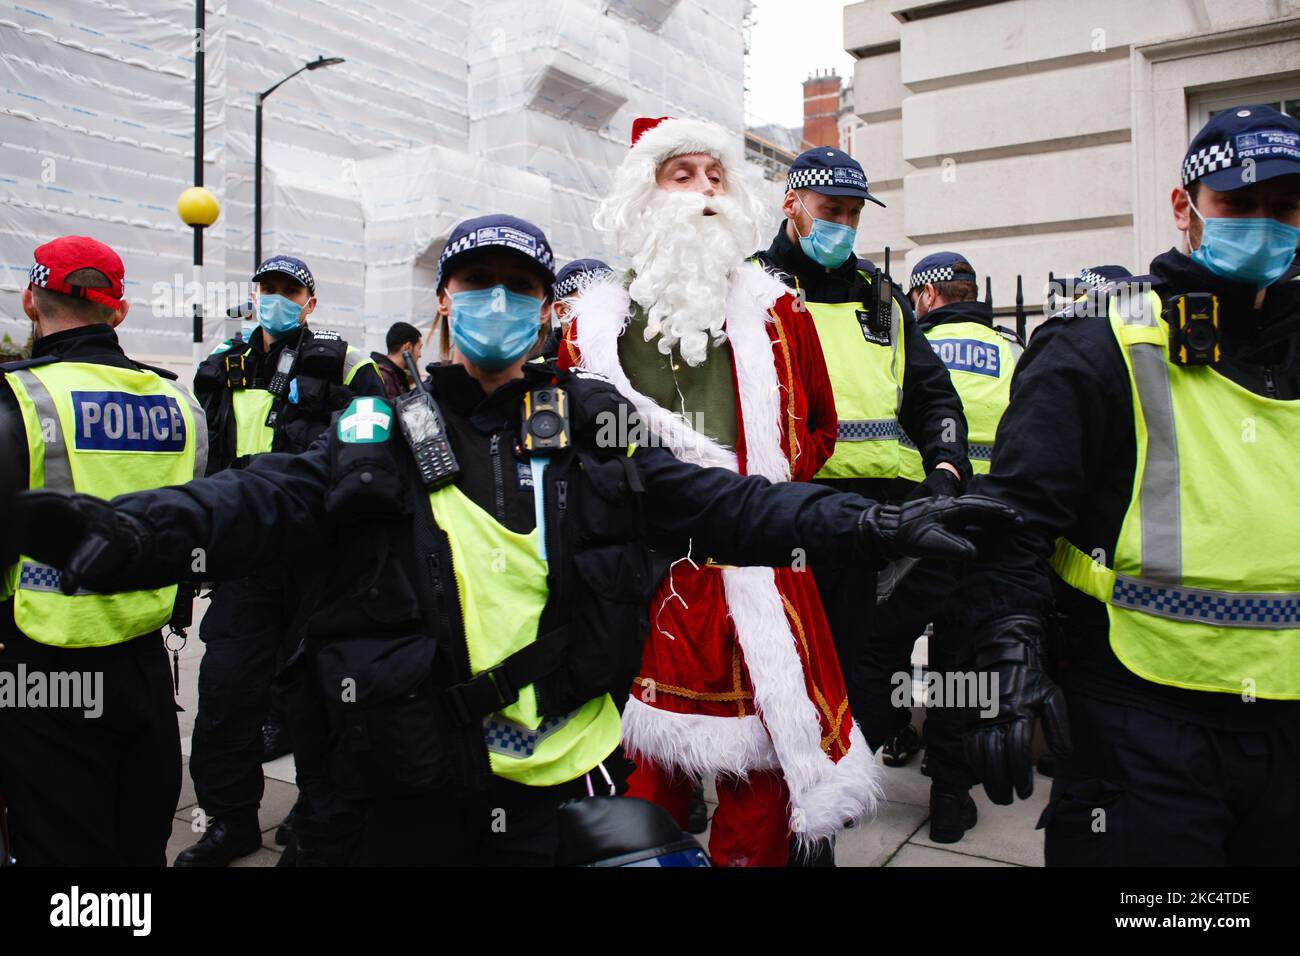 An anti-lockdown activist dressed as Father Christmas is arrested in Grosvenor Square during a demonstration in London, England, on November 28, 2020. In an evening update the Metropolitan Police announced it had made 155 arrests over the course of the day's demonstrations, for offences including breaches of coronavirus regulations, assault on police and possession of drugs. London is to return to 'Tier 2' or 'high alert' covid-19 restrictions once the current England-wide coronavirus lockdown ends next Wednesday. All three of the tiers, assigned to local authorities across England, have been  Stock Photo